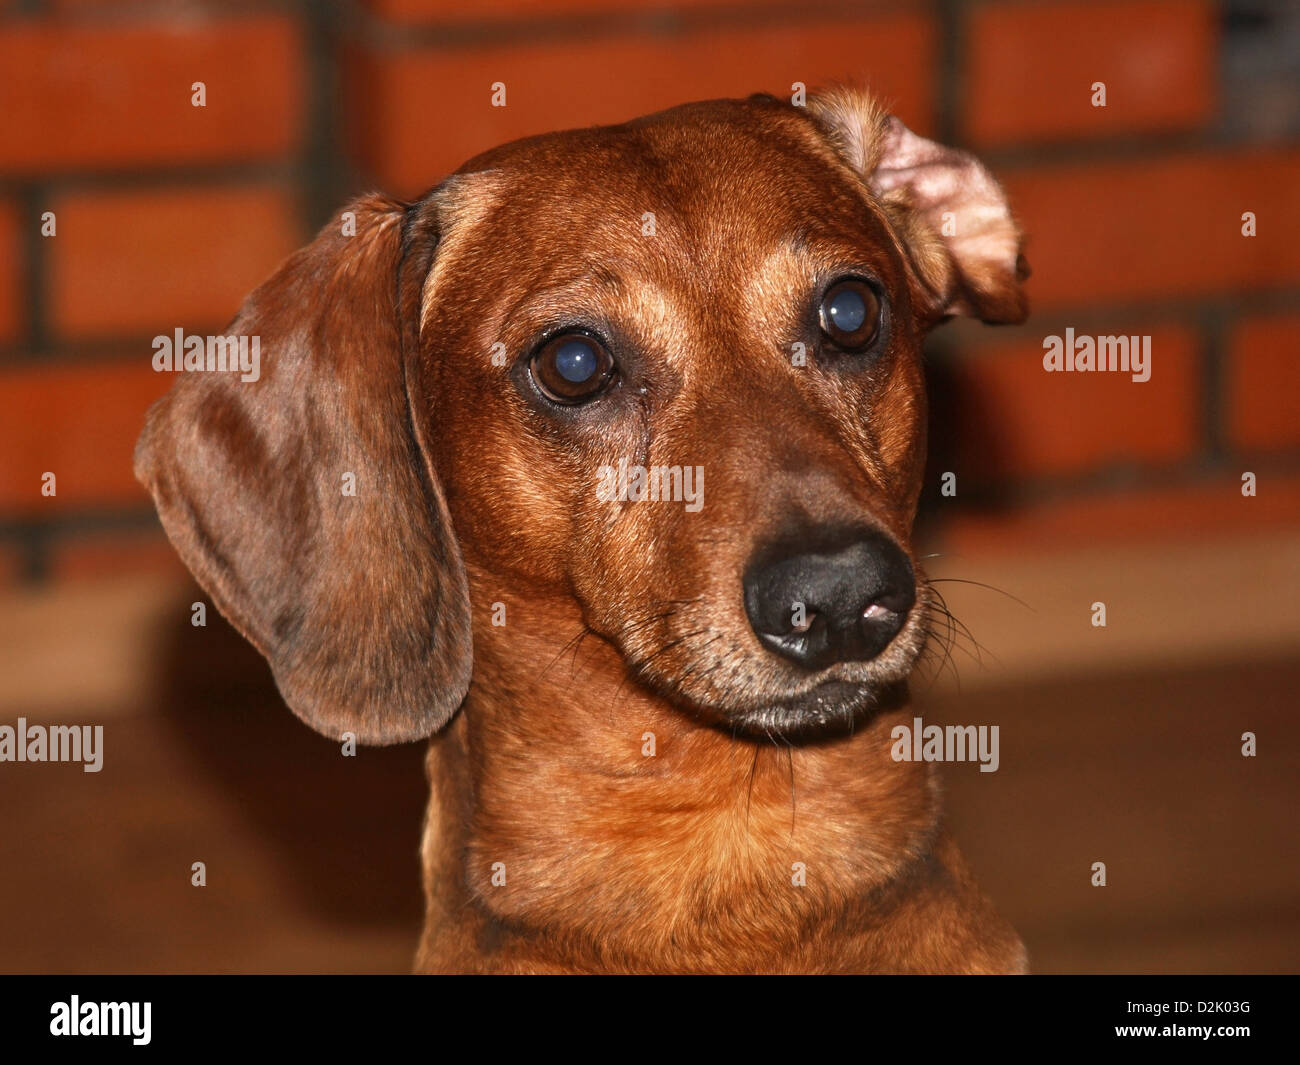 Dachshund in front of a brick background looking at the camera. Stock Photo